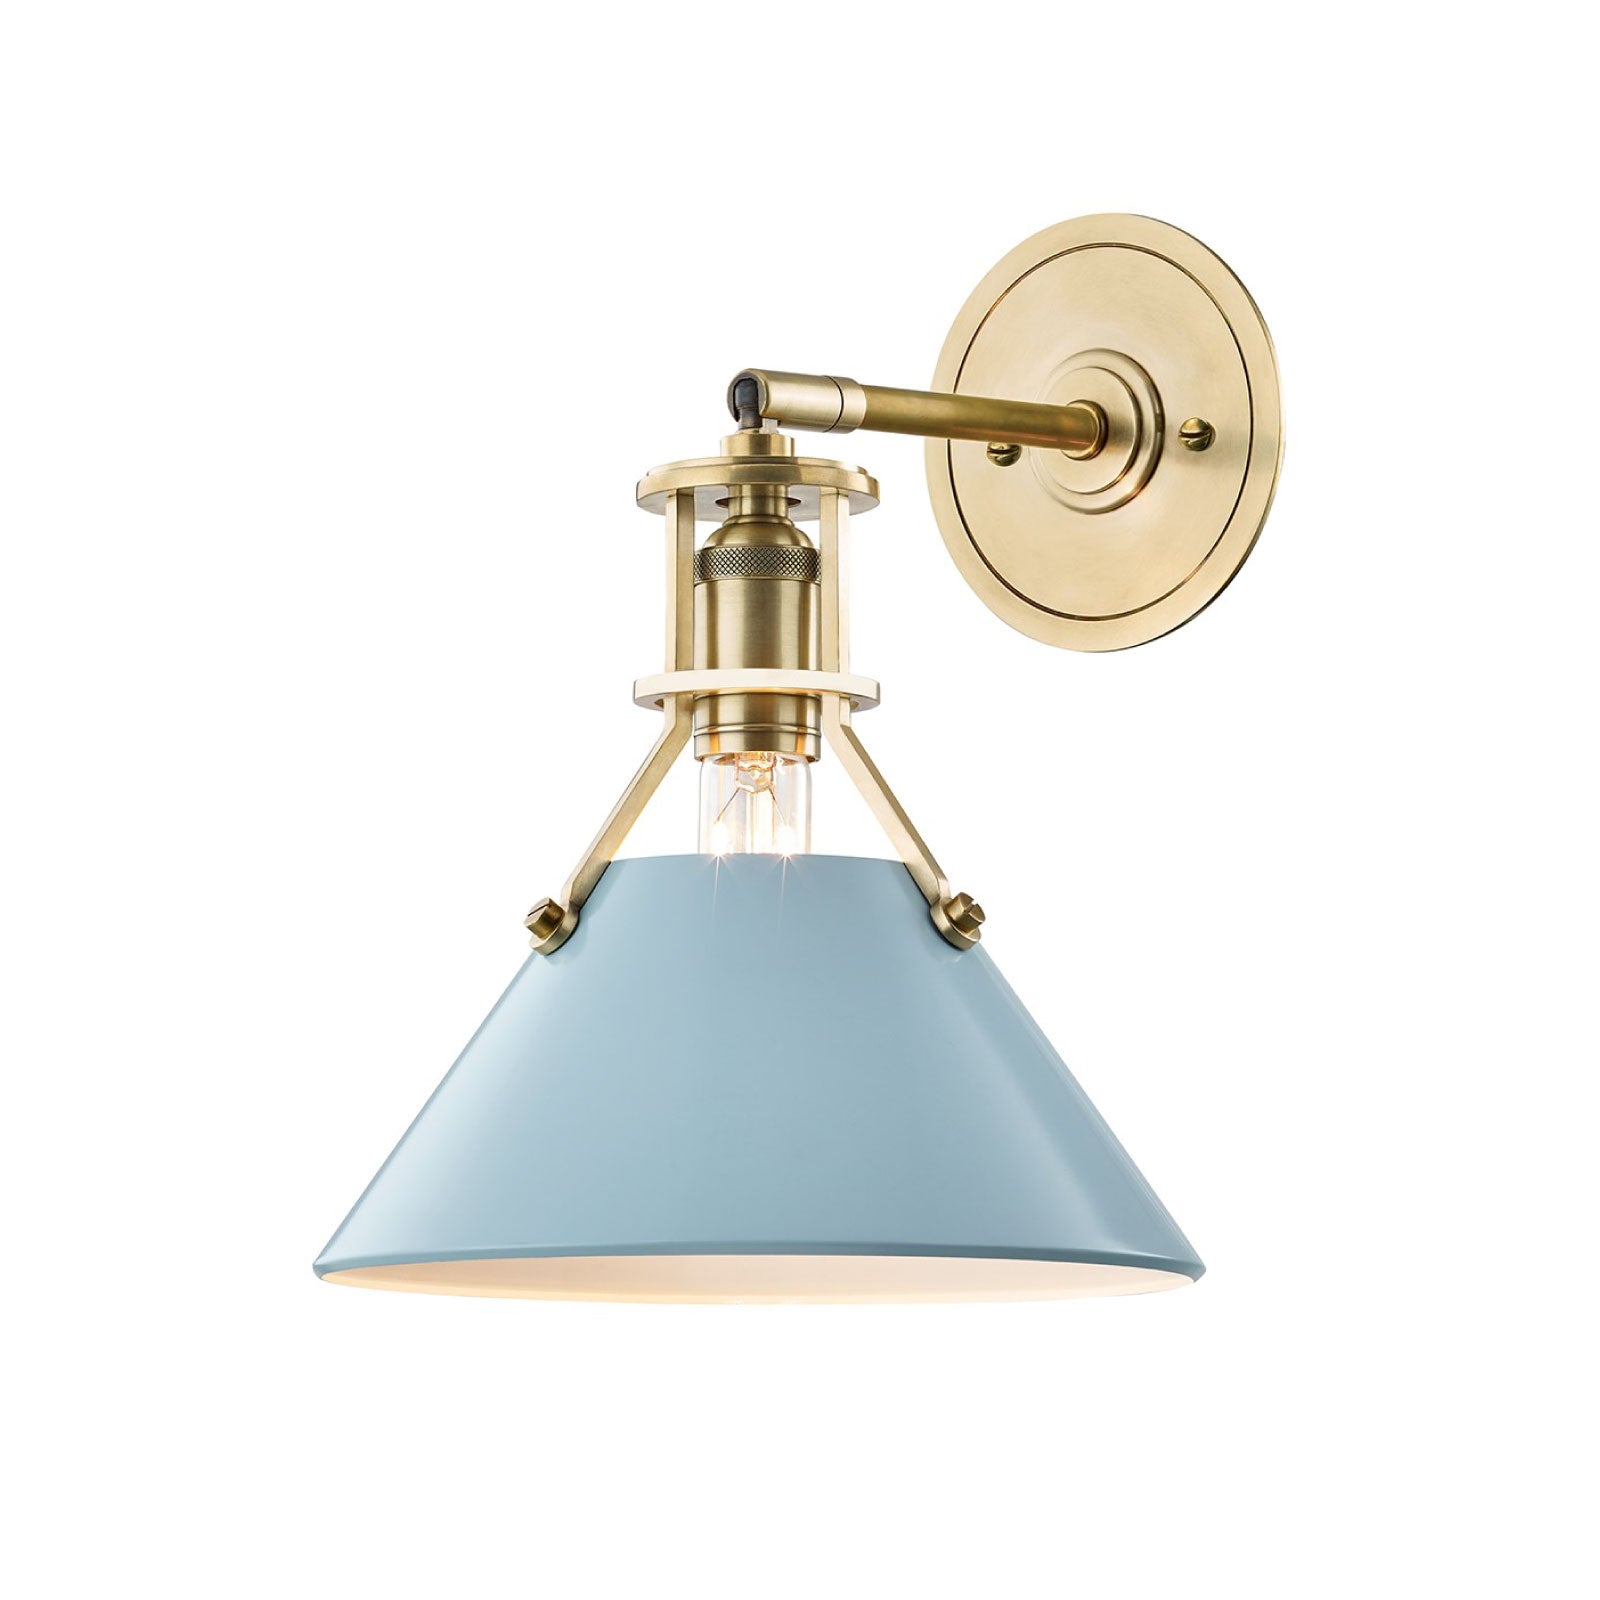 Charles Sconce in Blue and Brass